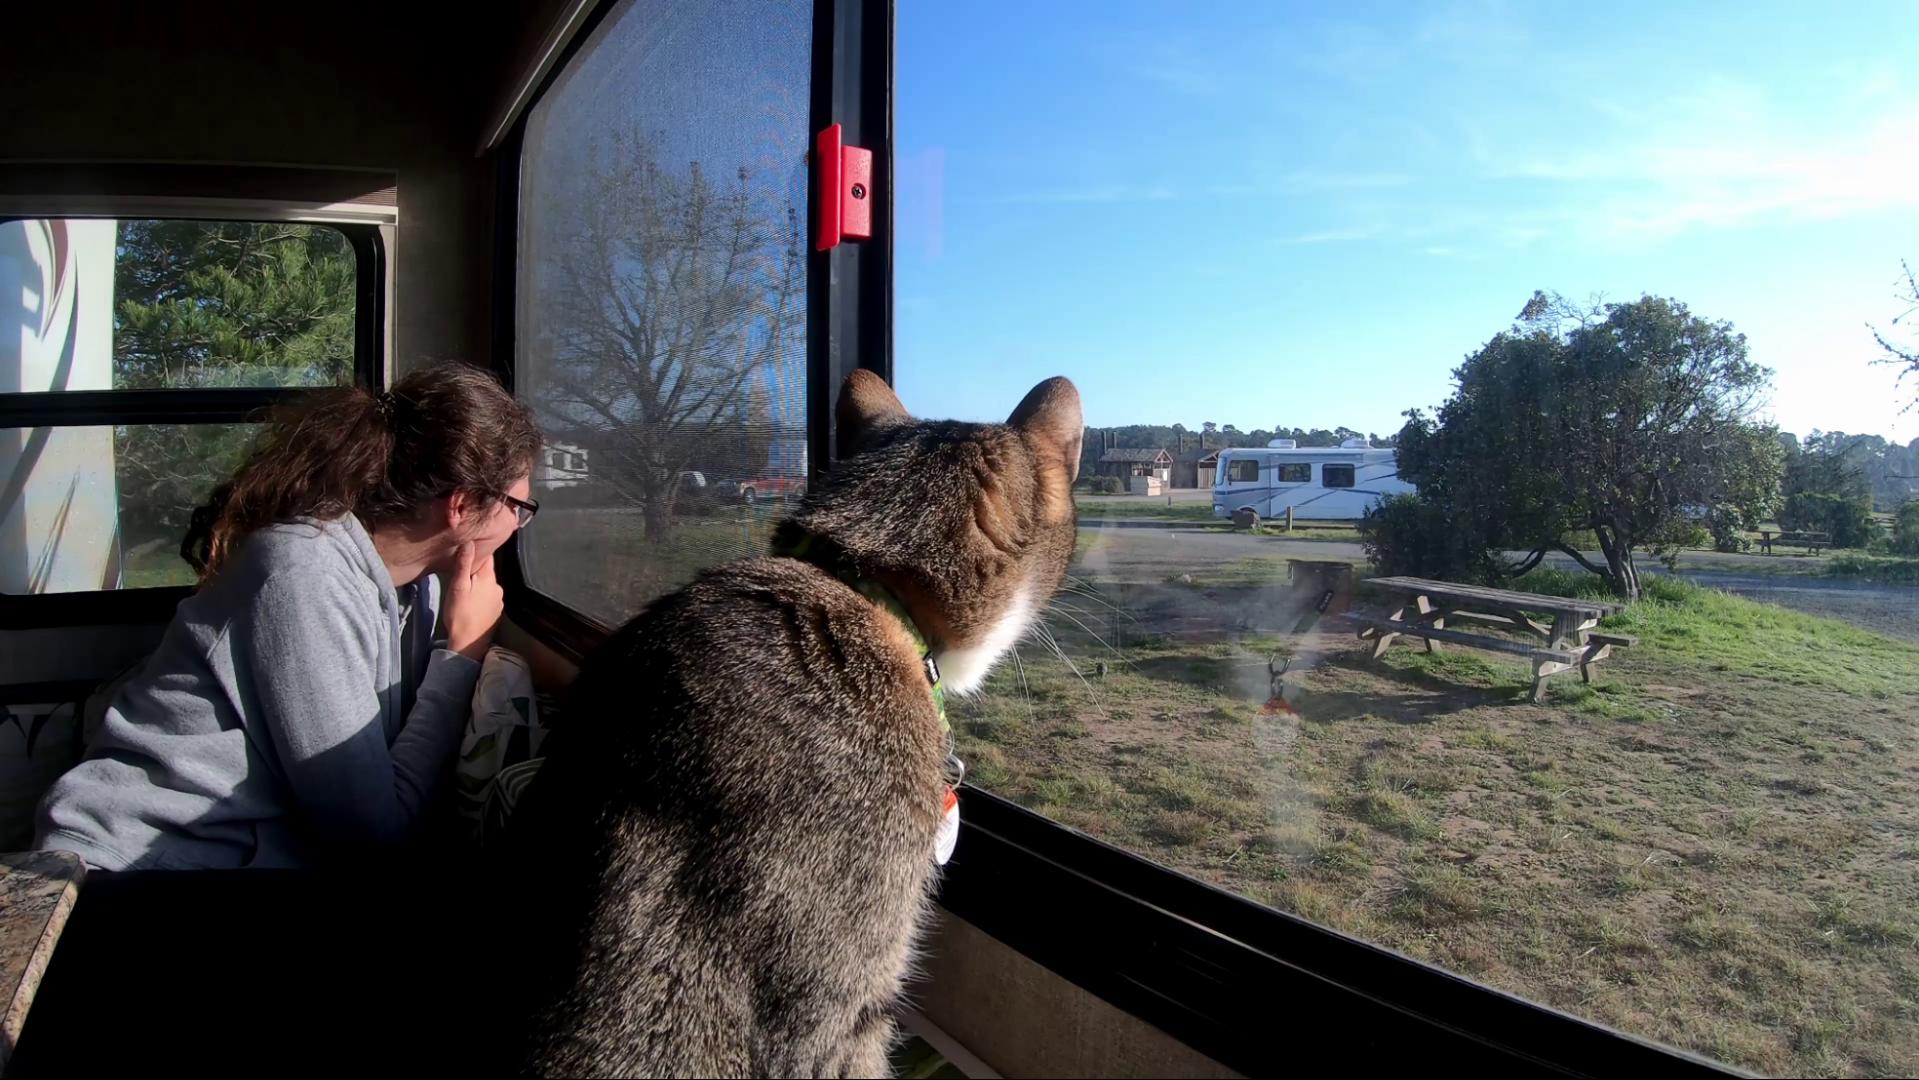 Benny and Mel watching the quails out the window on our site at washburn in the Hearst San Simeon State Park. 